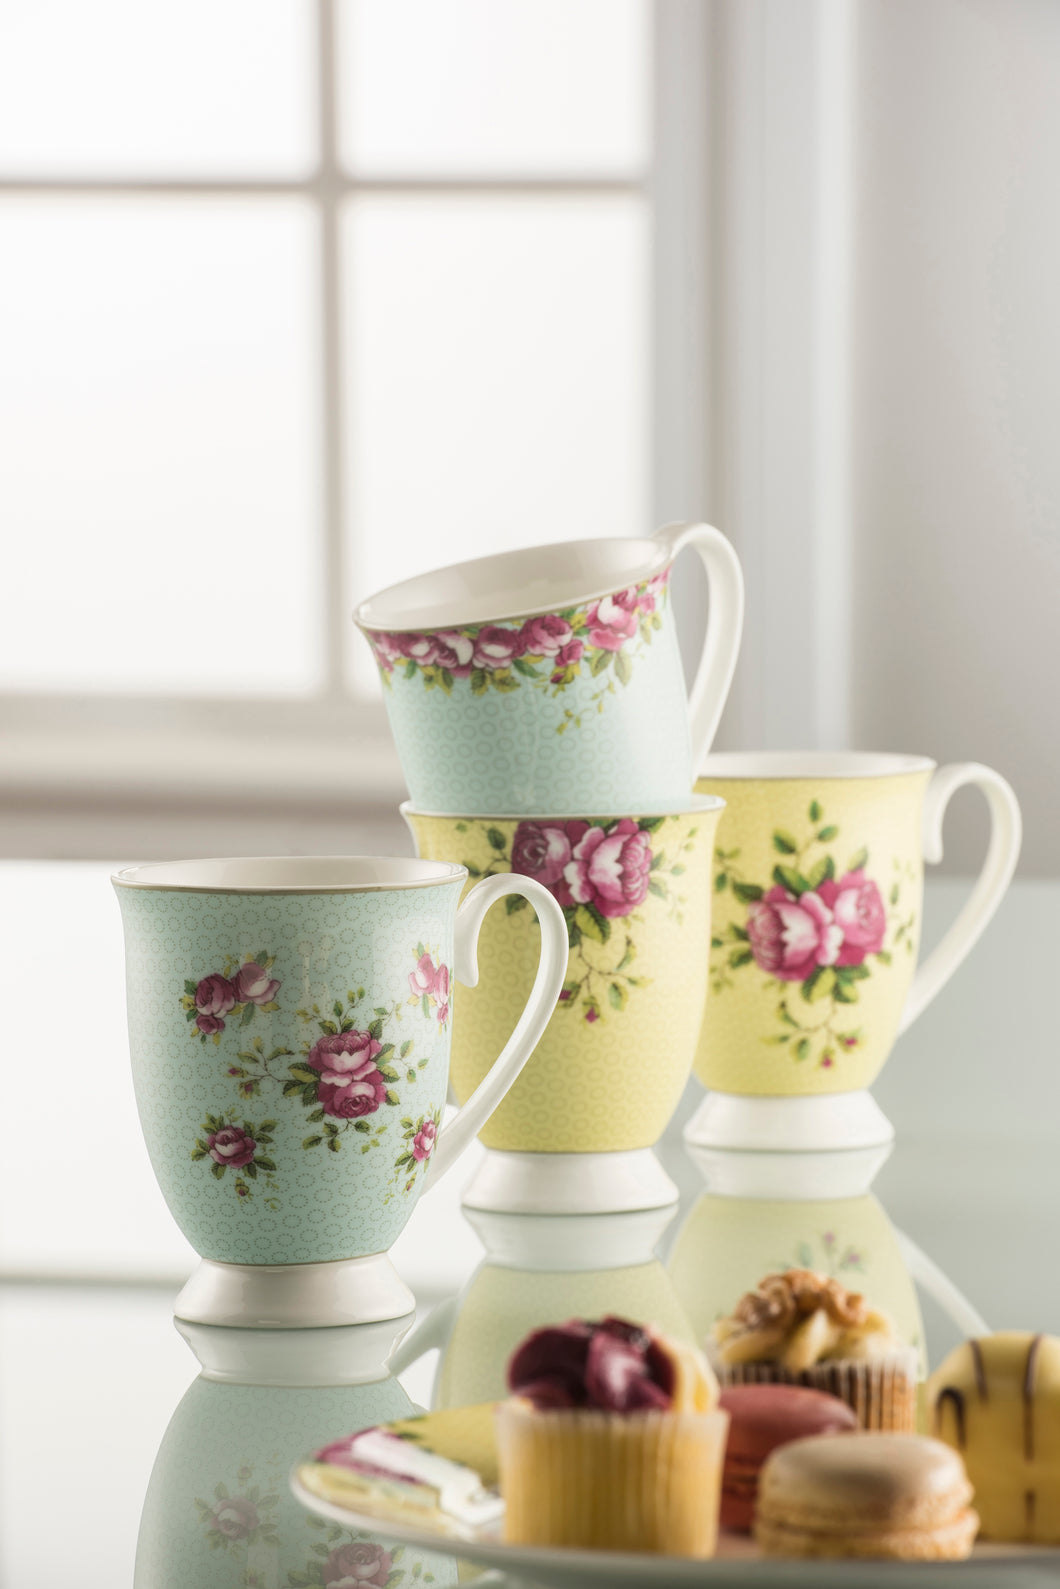 Anysley - Rose Collection Lemon & Mint Green Mugs in a Gift Box